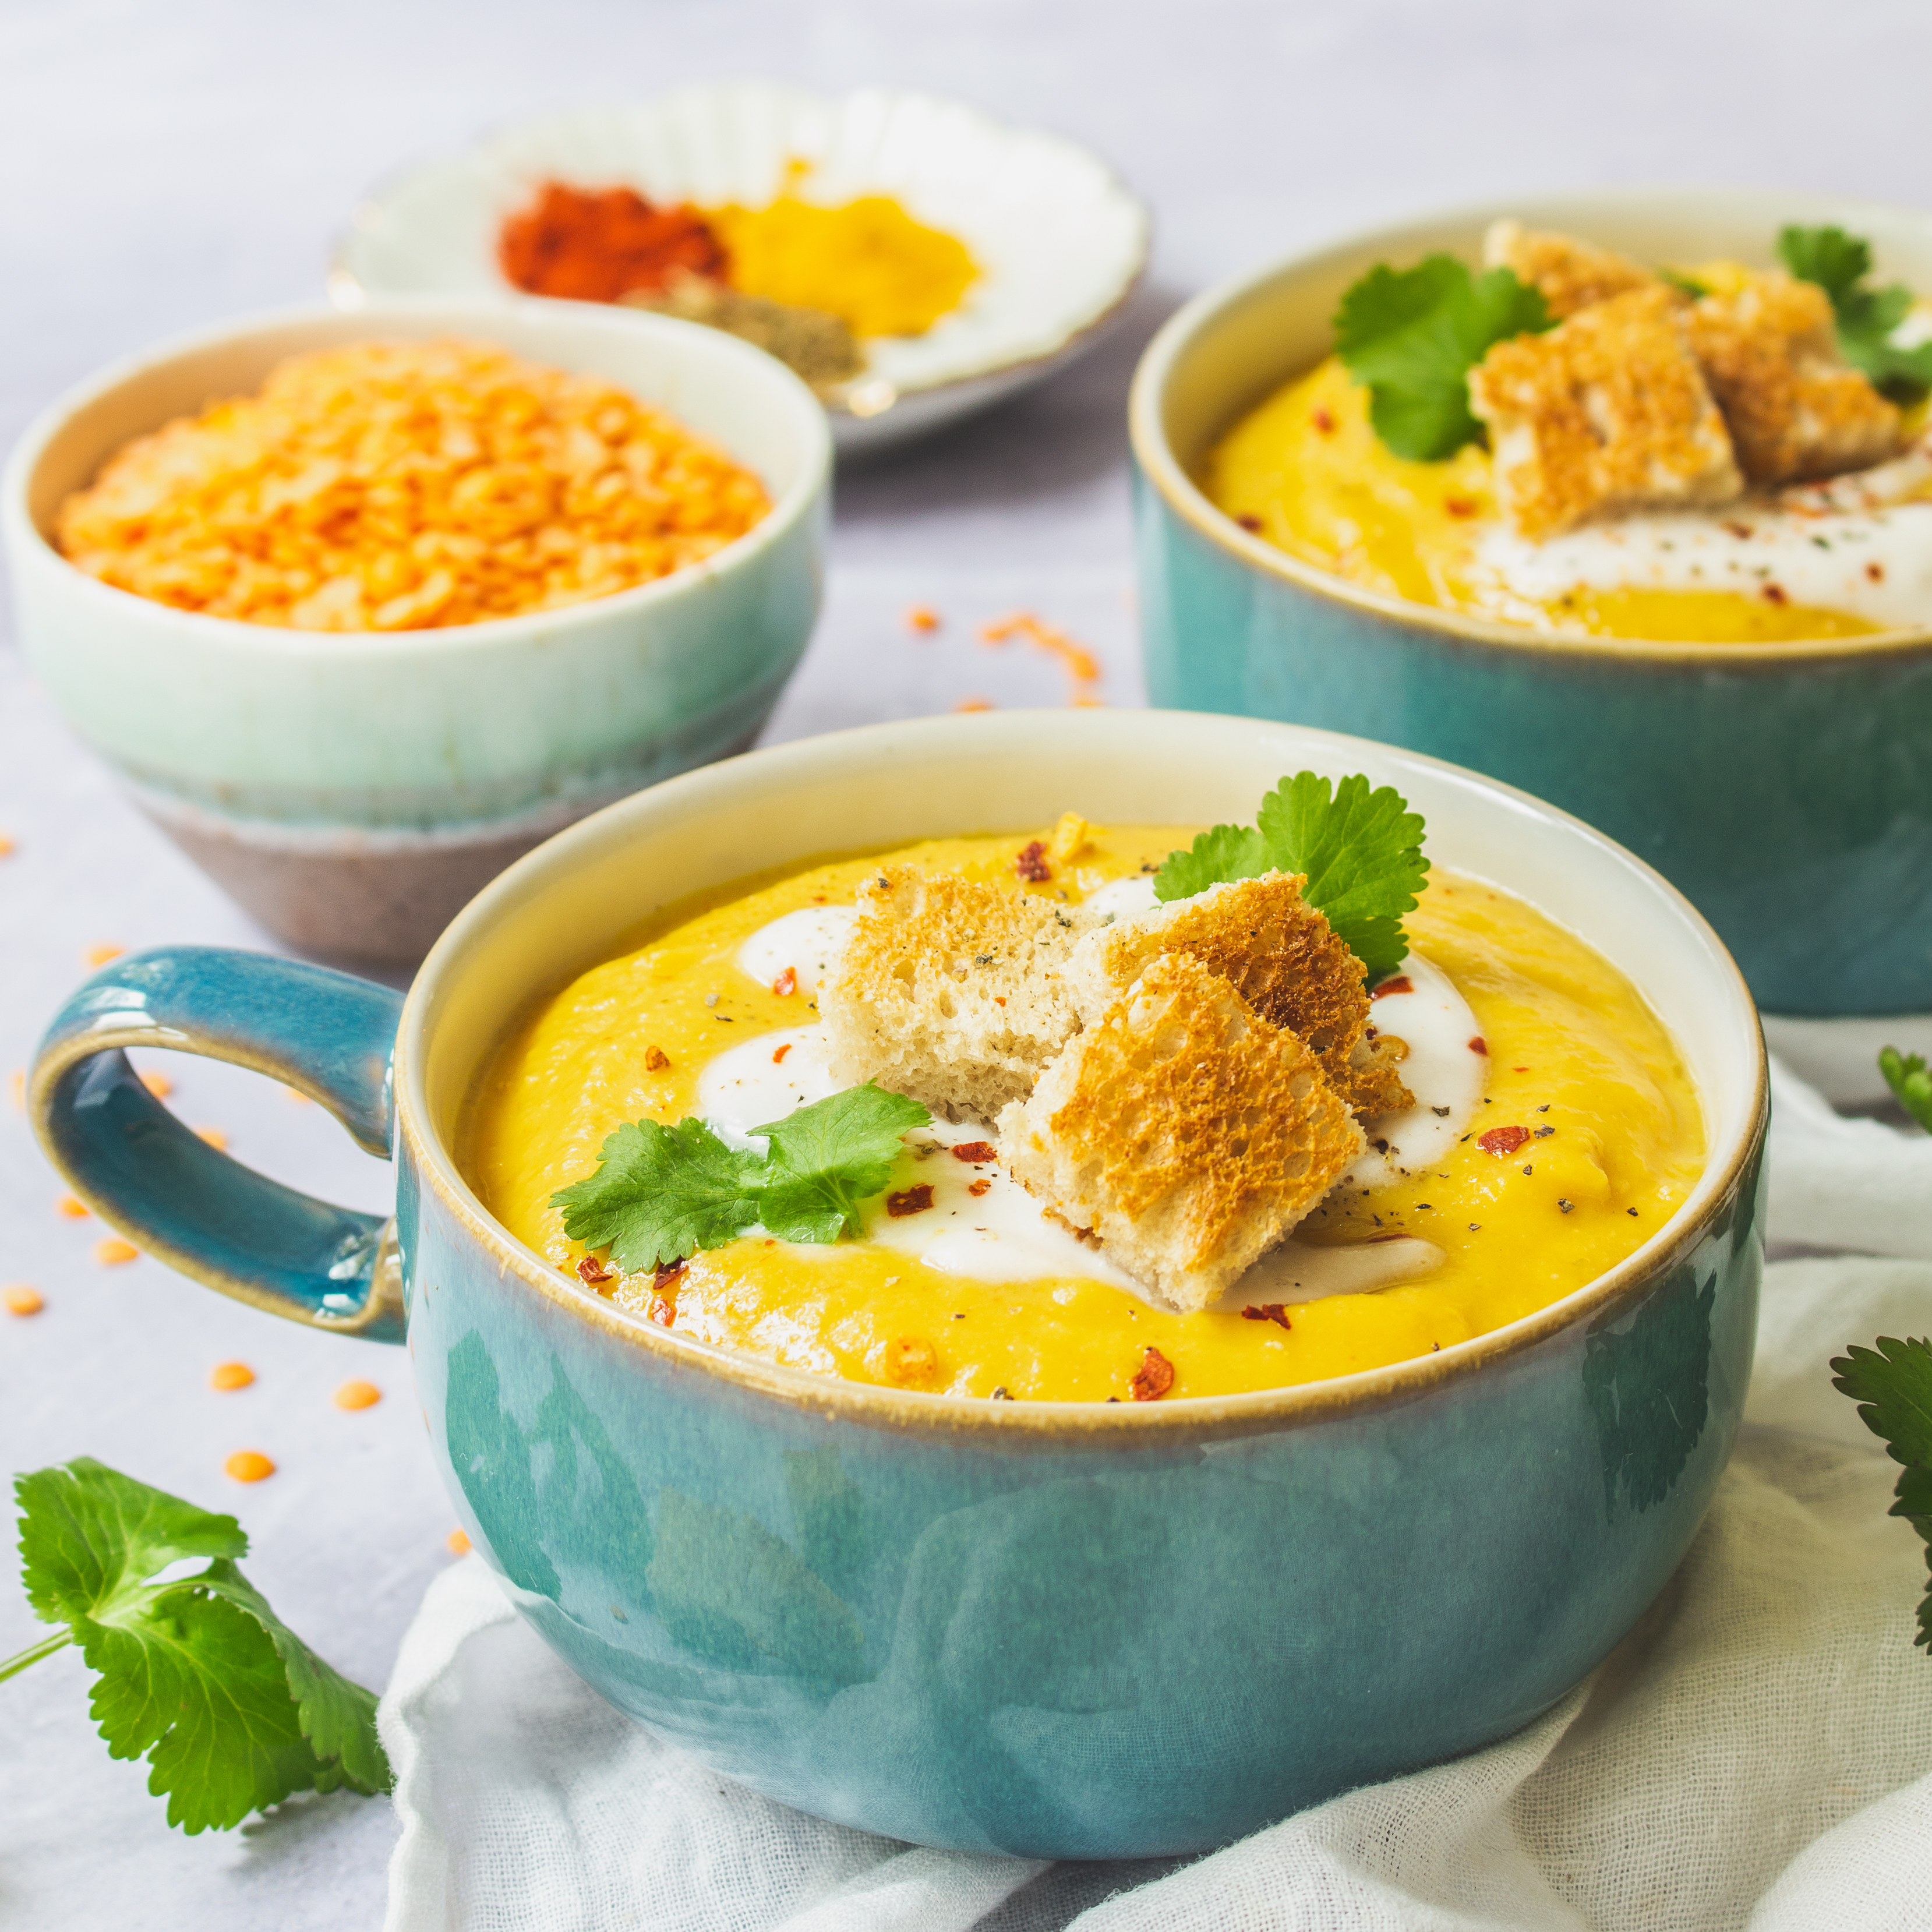 Creamy Spiced Red Lentil and Carrot Soup